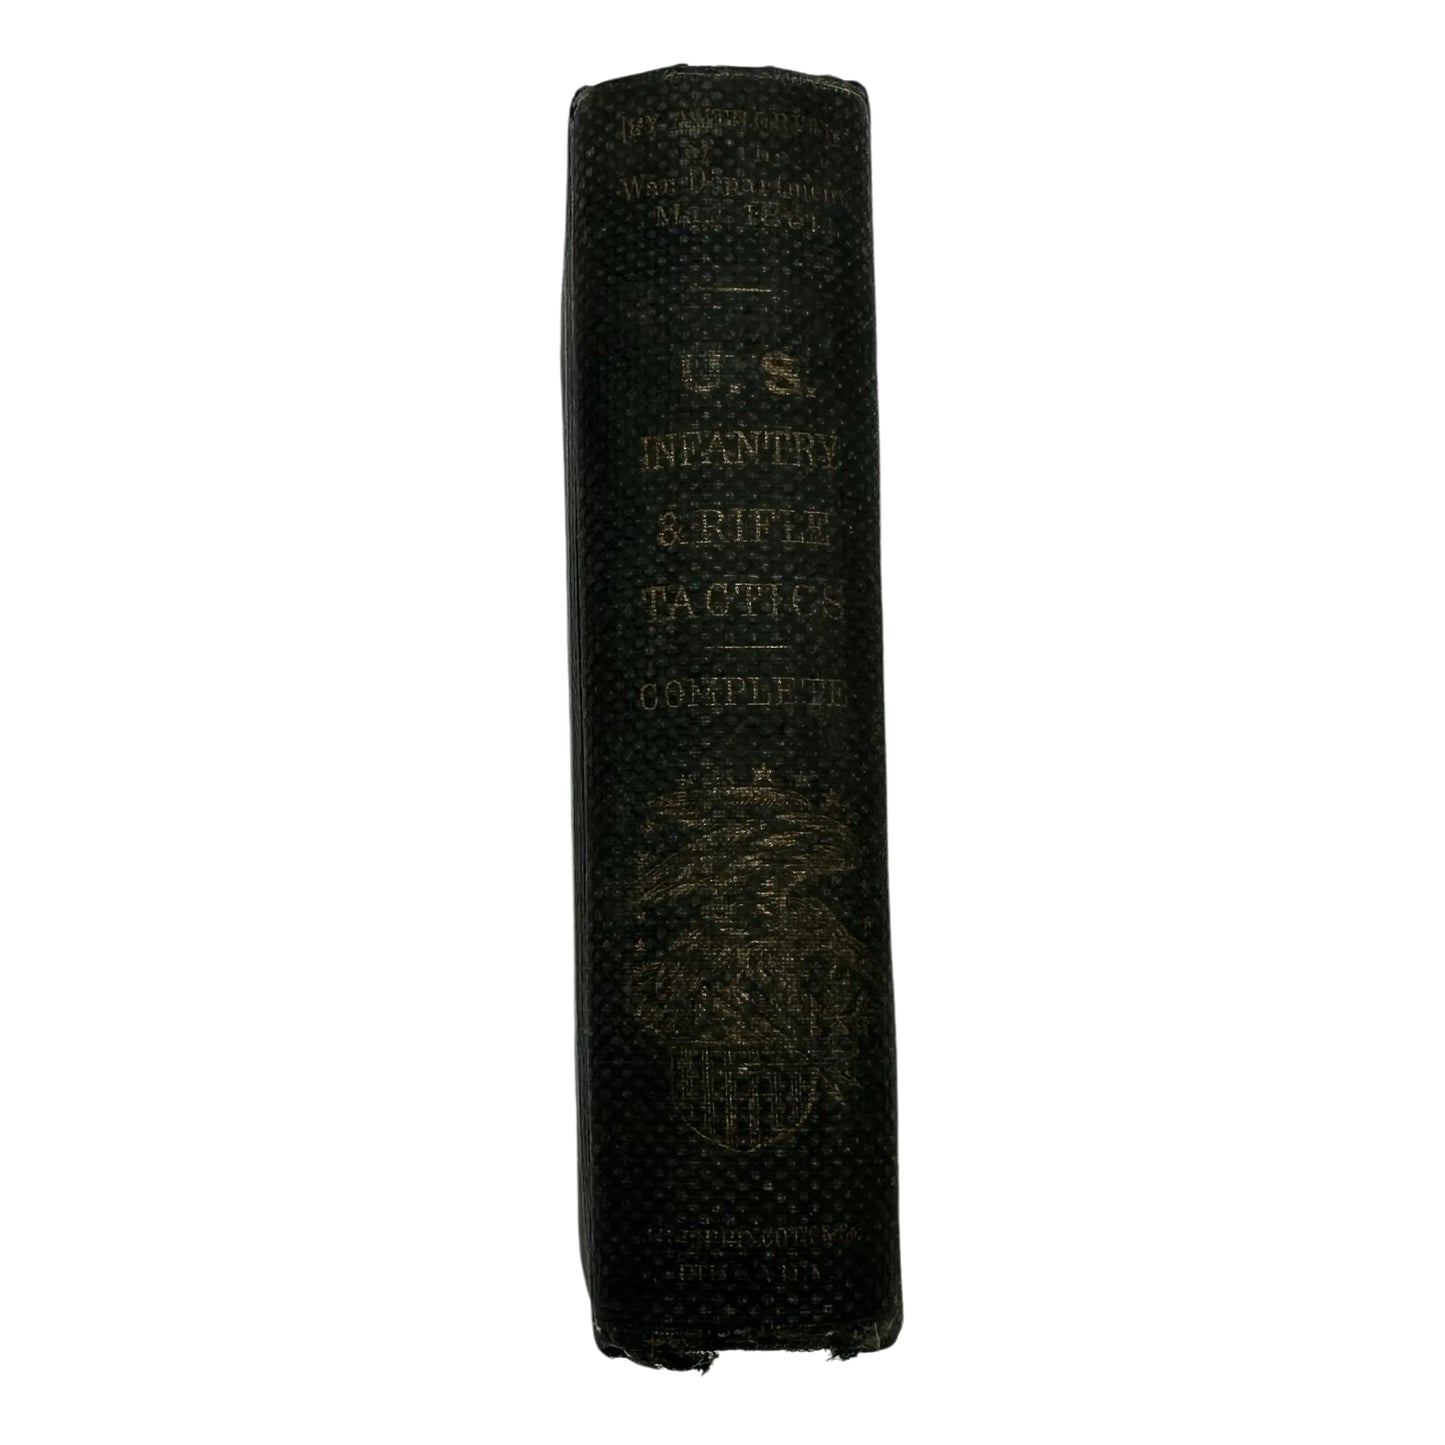 "U.S. Infantry Tactics for the Instruction, Exercise and Maneuvers of the United States Infantry” — 1861 — First edition